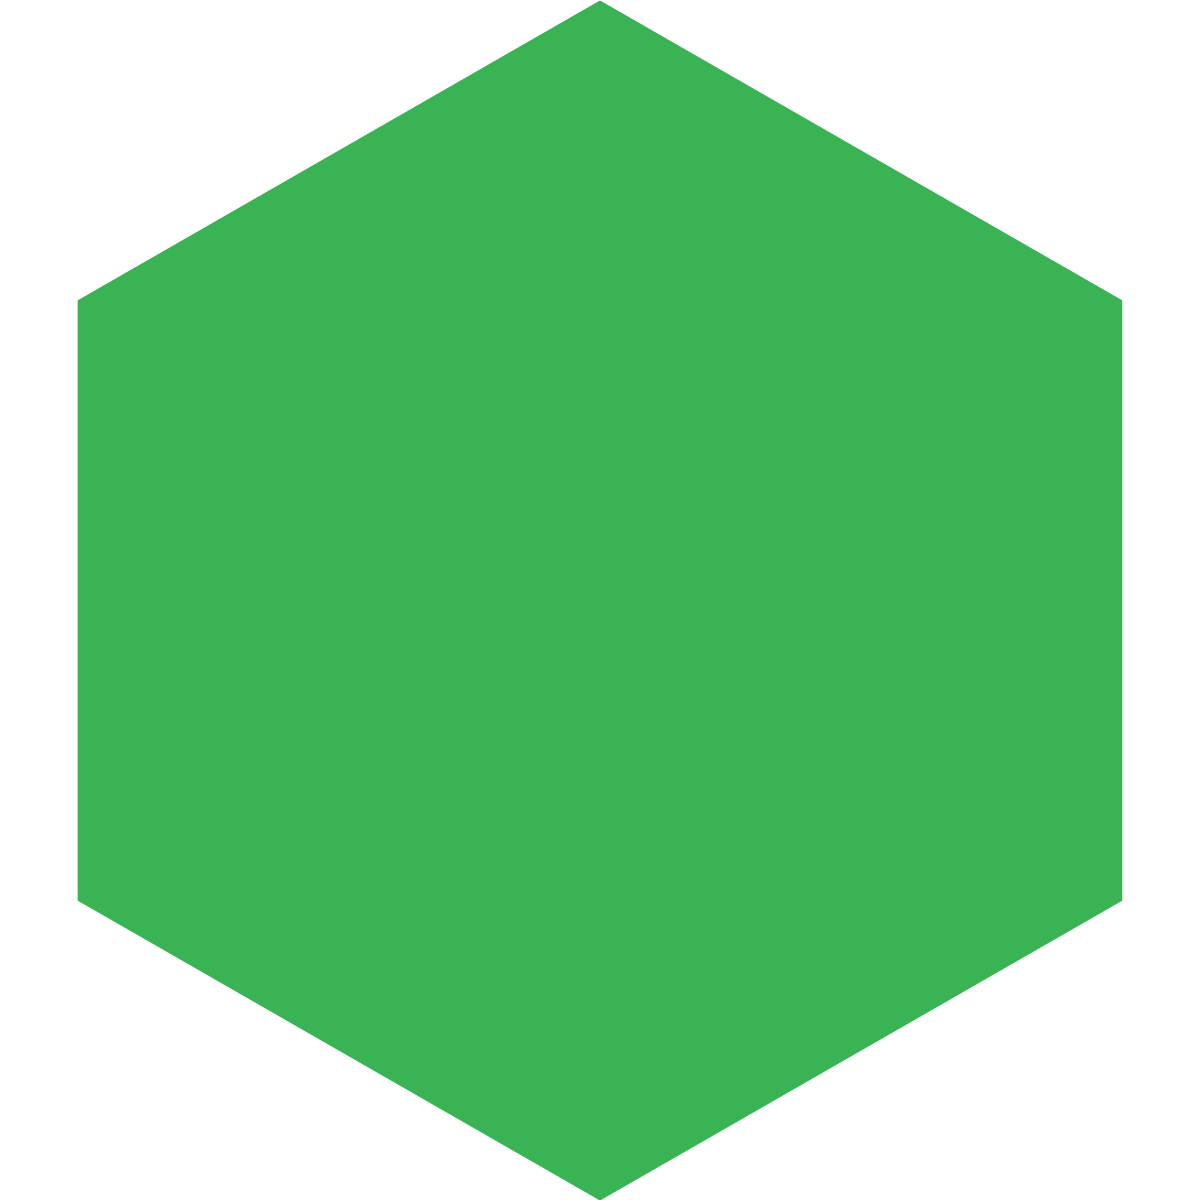 Hexagon clipart green. Free download best on